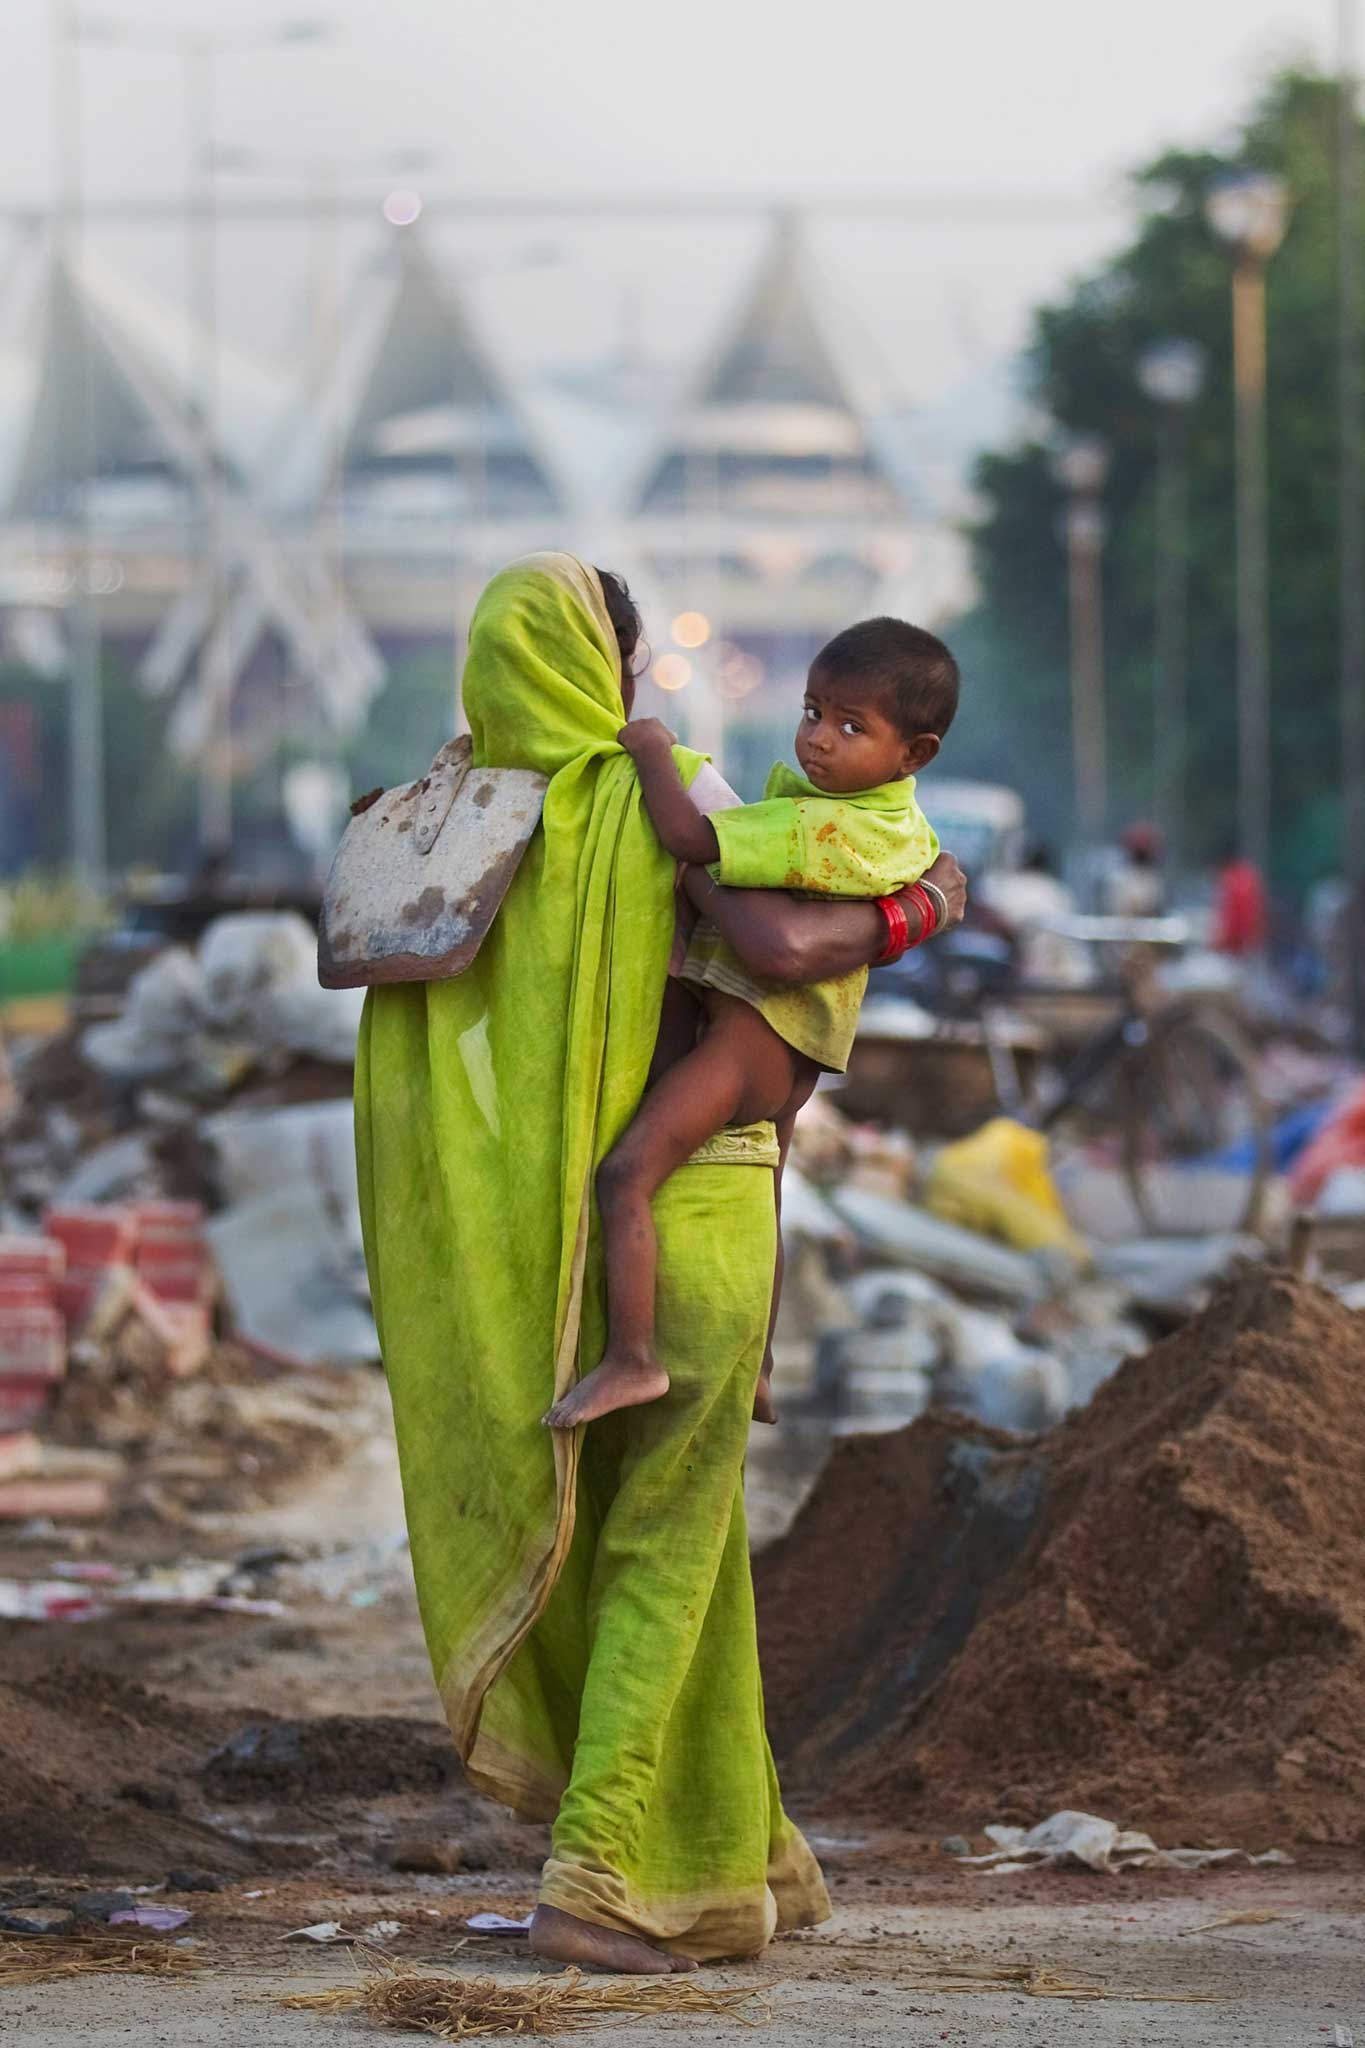 Street life: a labourer with infant and shovel in New Delhi